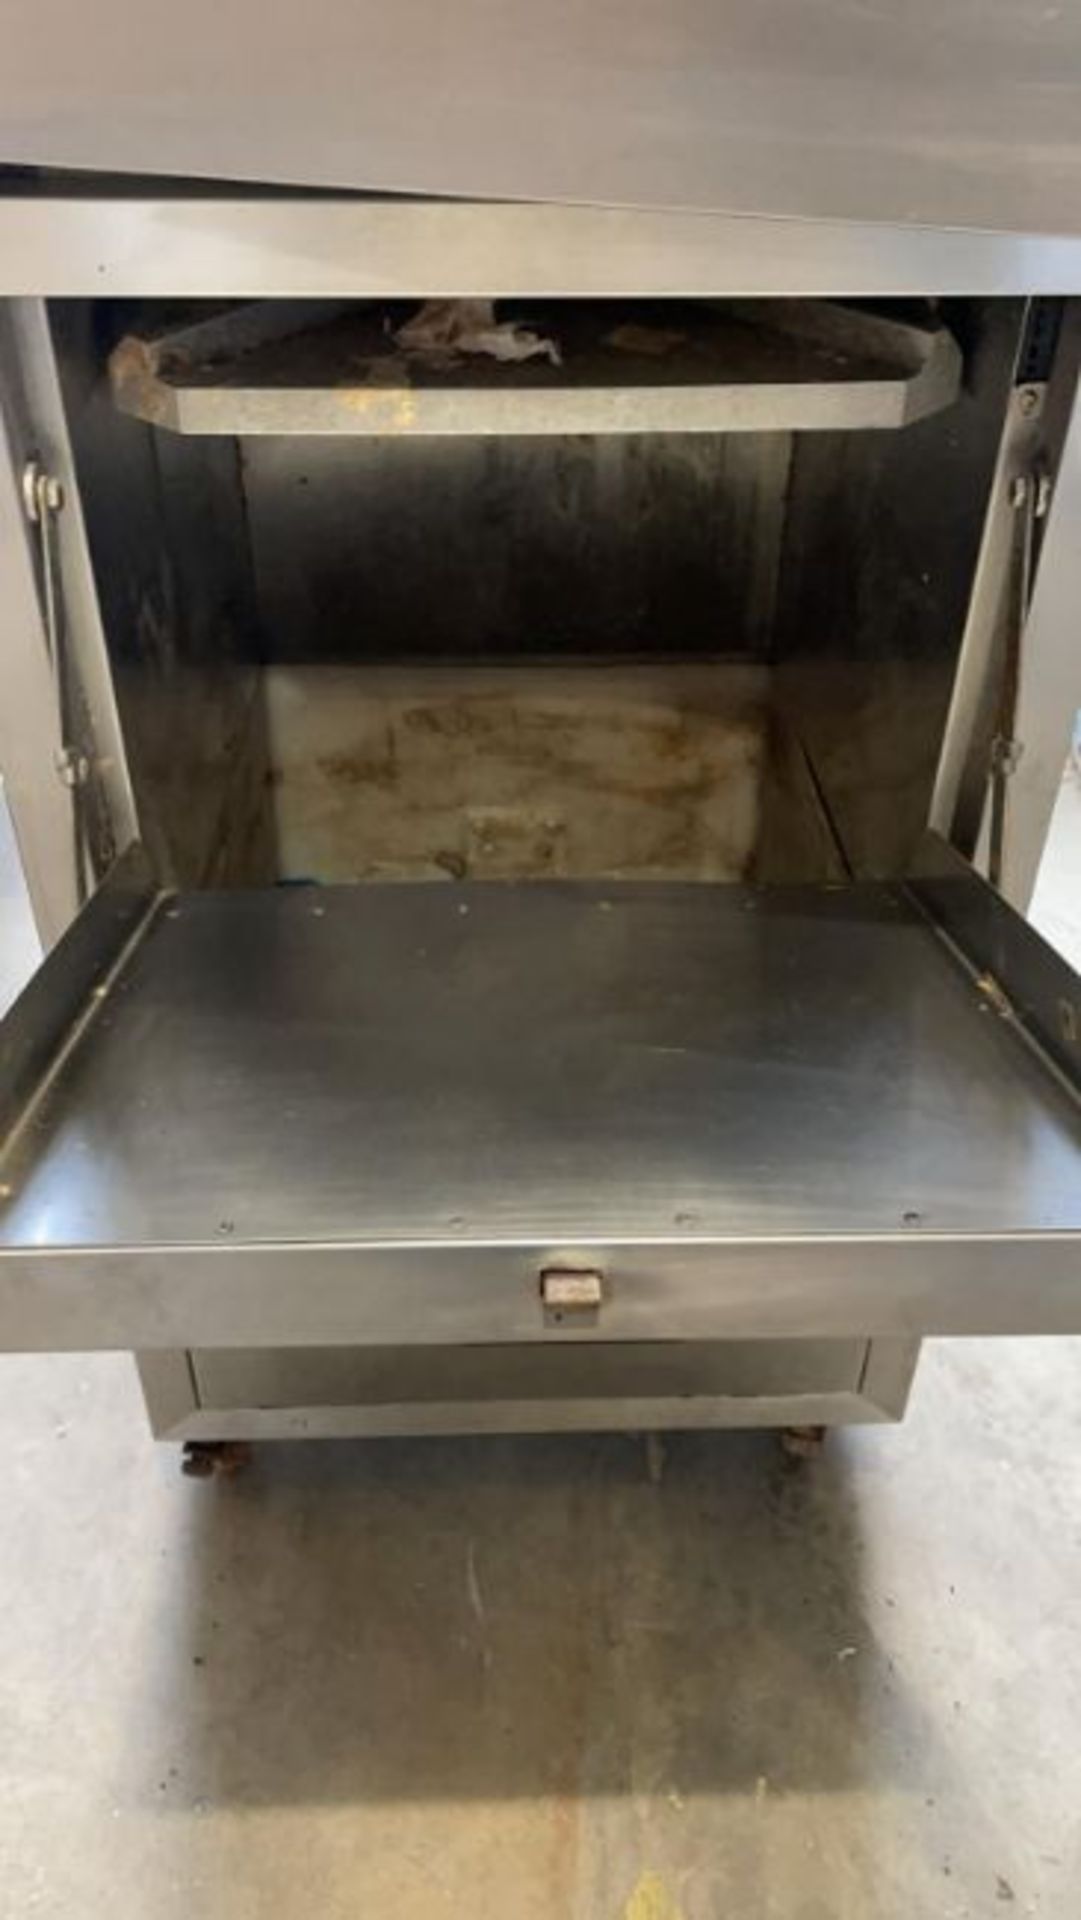 1 x Tony Team TT240 Bag Compactor With 240l Capacity - Stainless Steel Finish - CL011 - Location: - Image 4 of 10